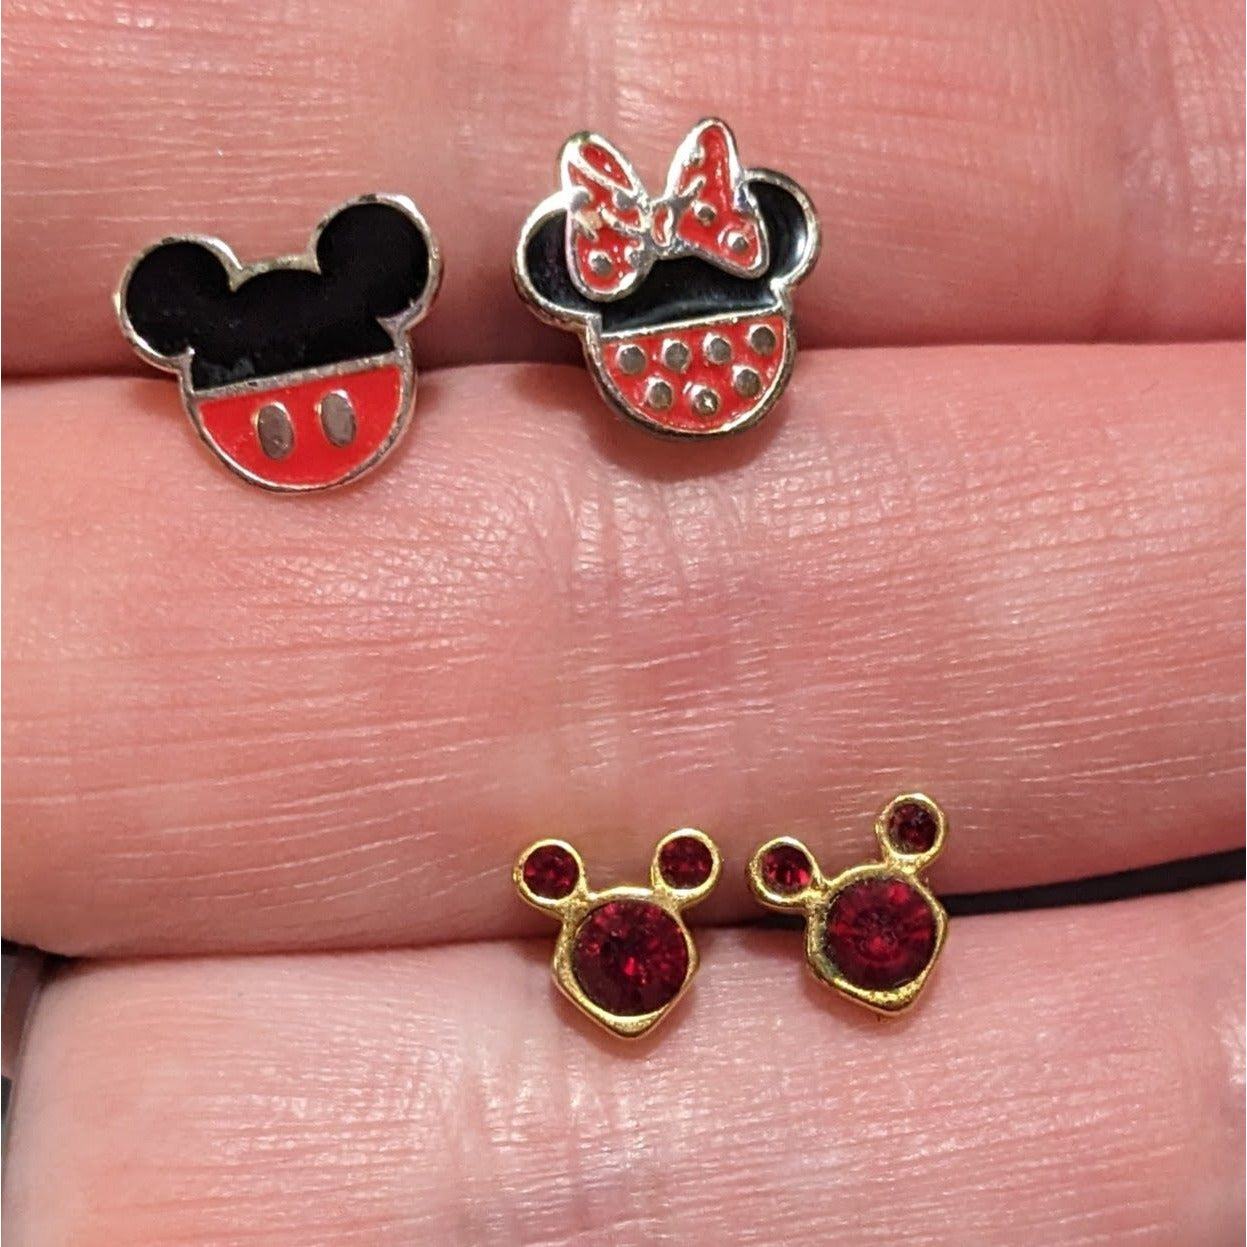 Mickey Mouse Earring Pairs (2 Pairs)